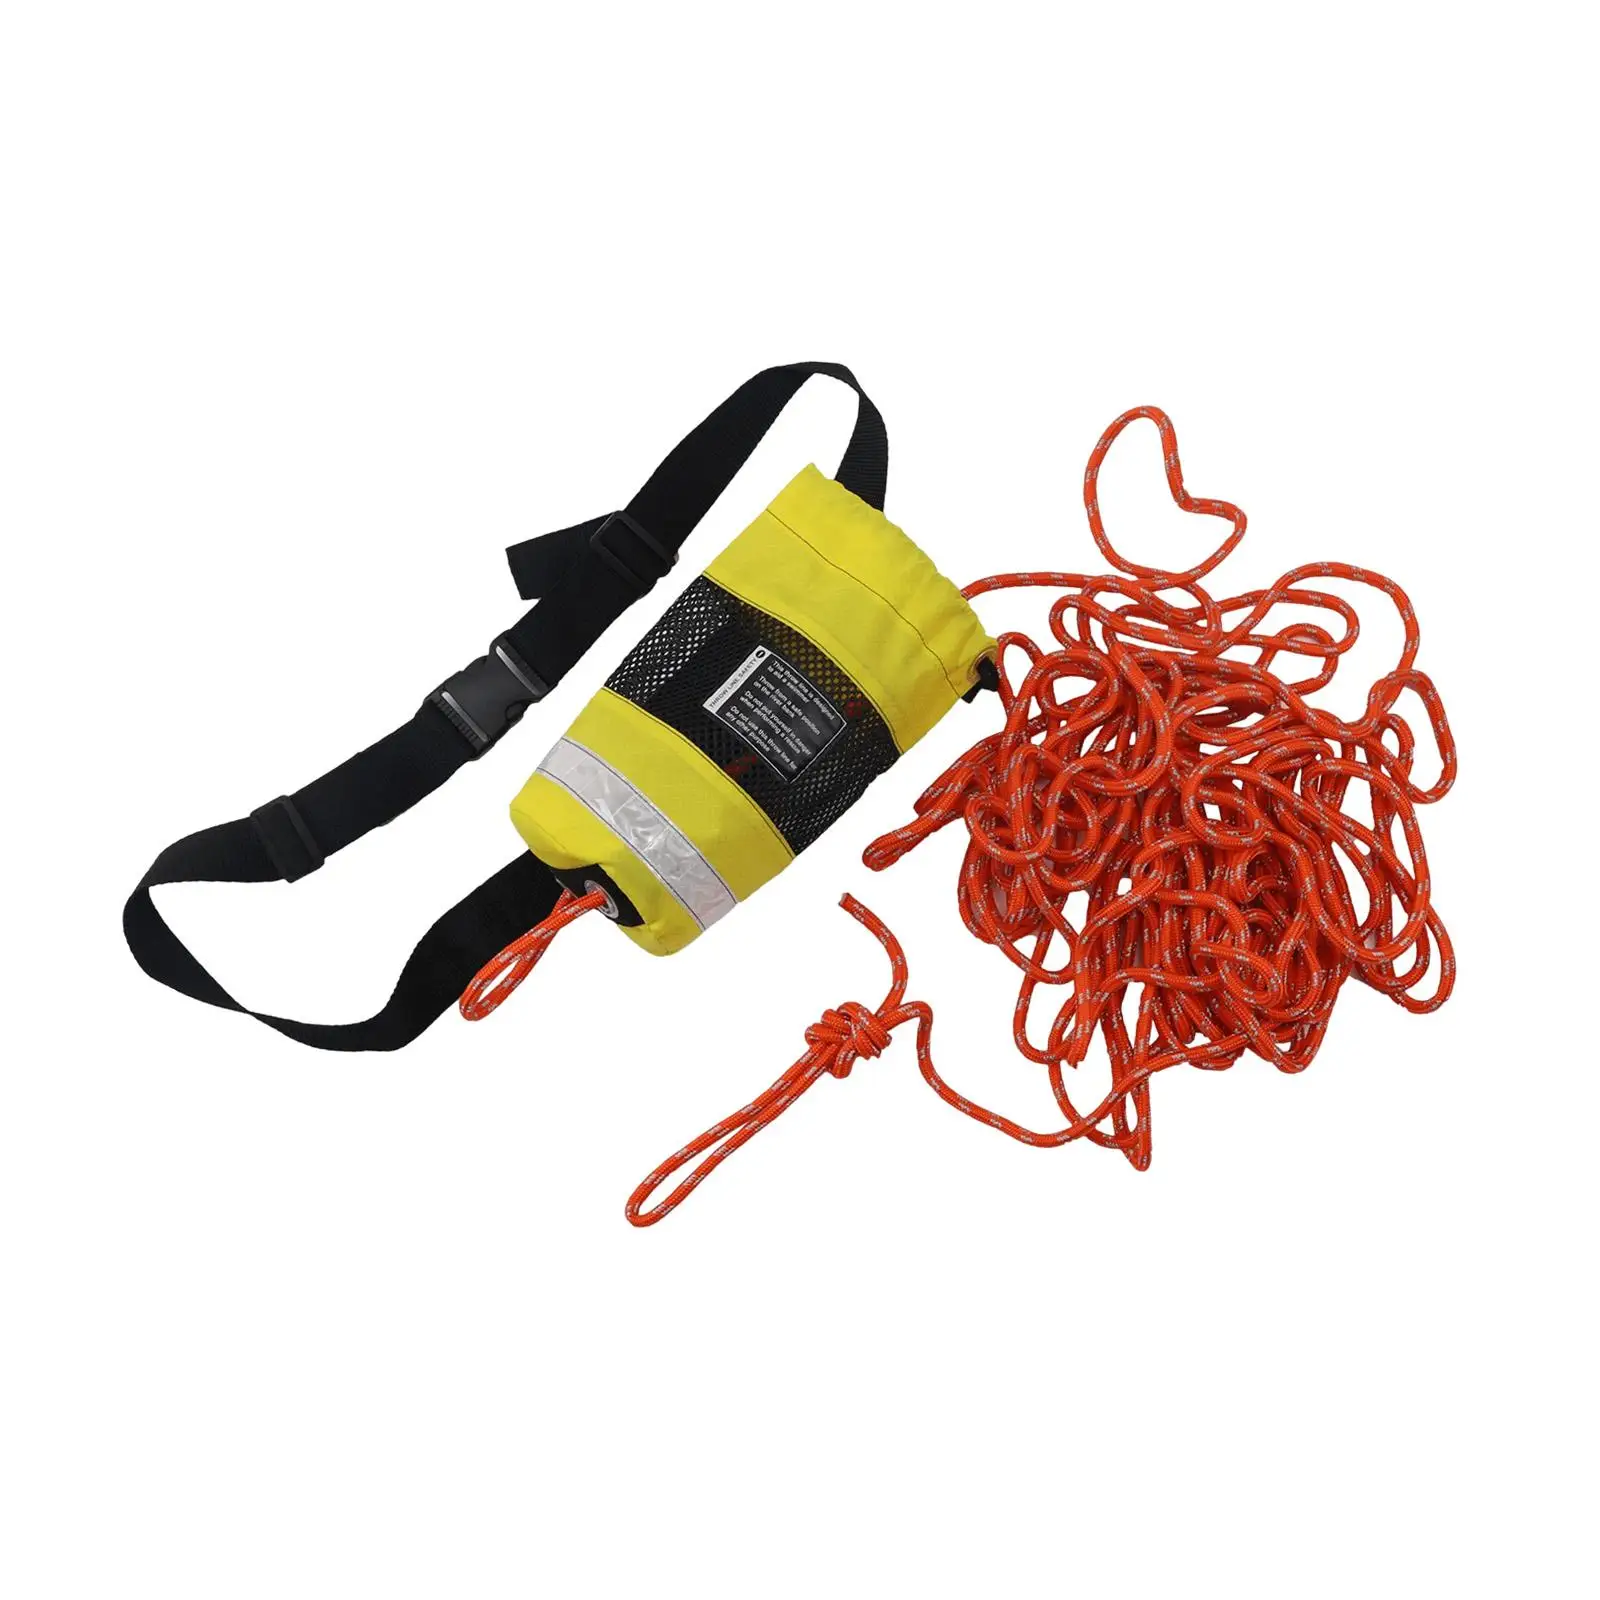 Portable Throwable Rope Throw Bag 21M Flotation Device Reflective for Yacht